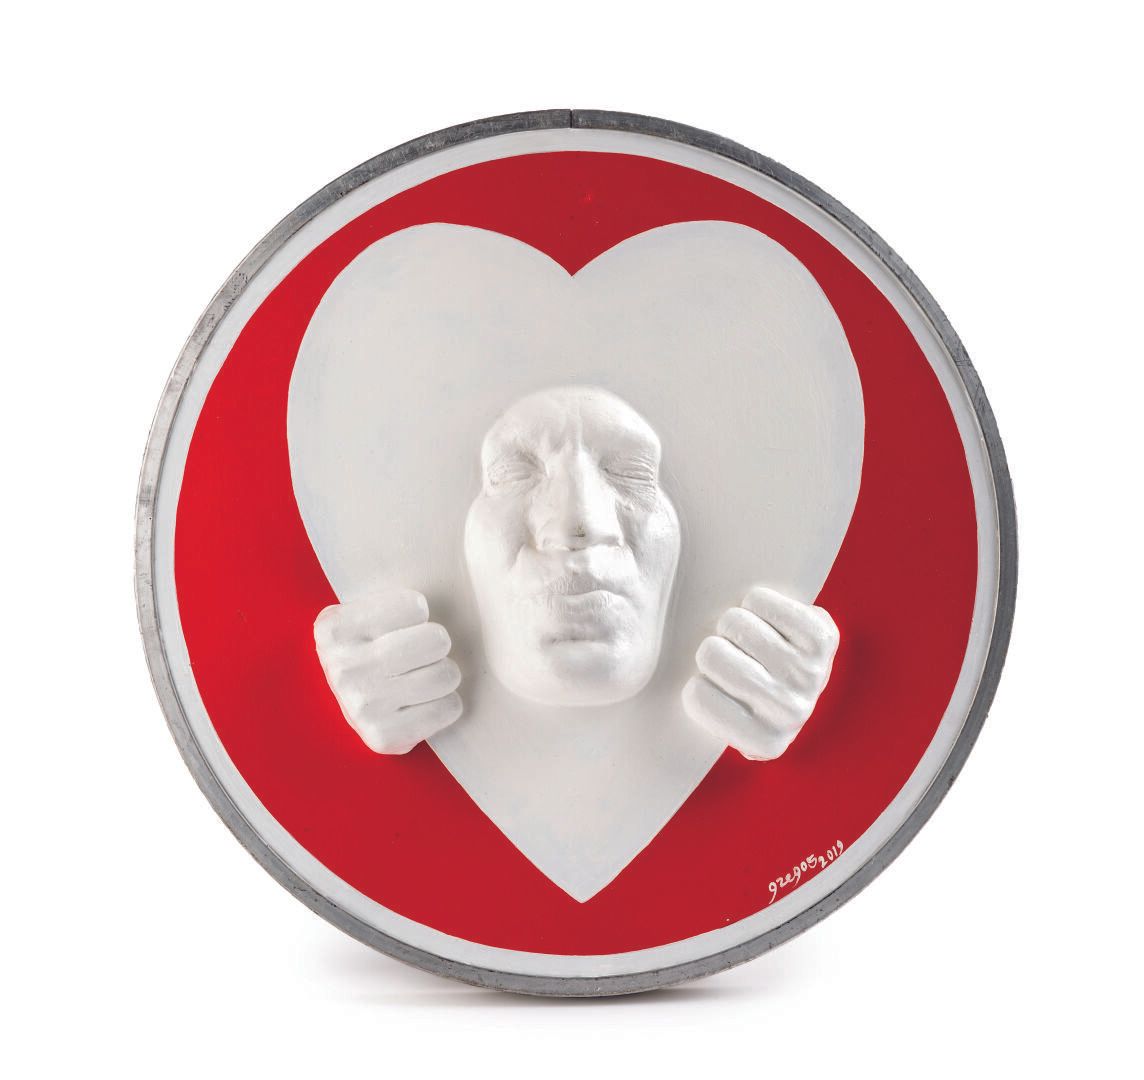 Null GREGOS (1972)

Kiss my blank heart, 2019

Sculpture in plaster, resin and a&hellip;